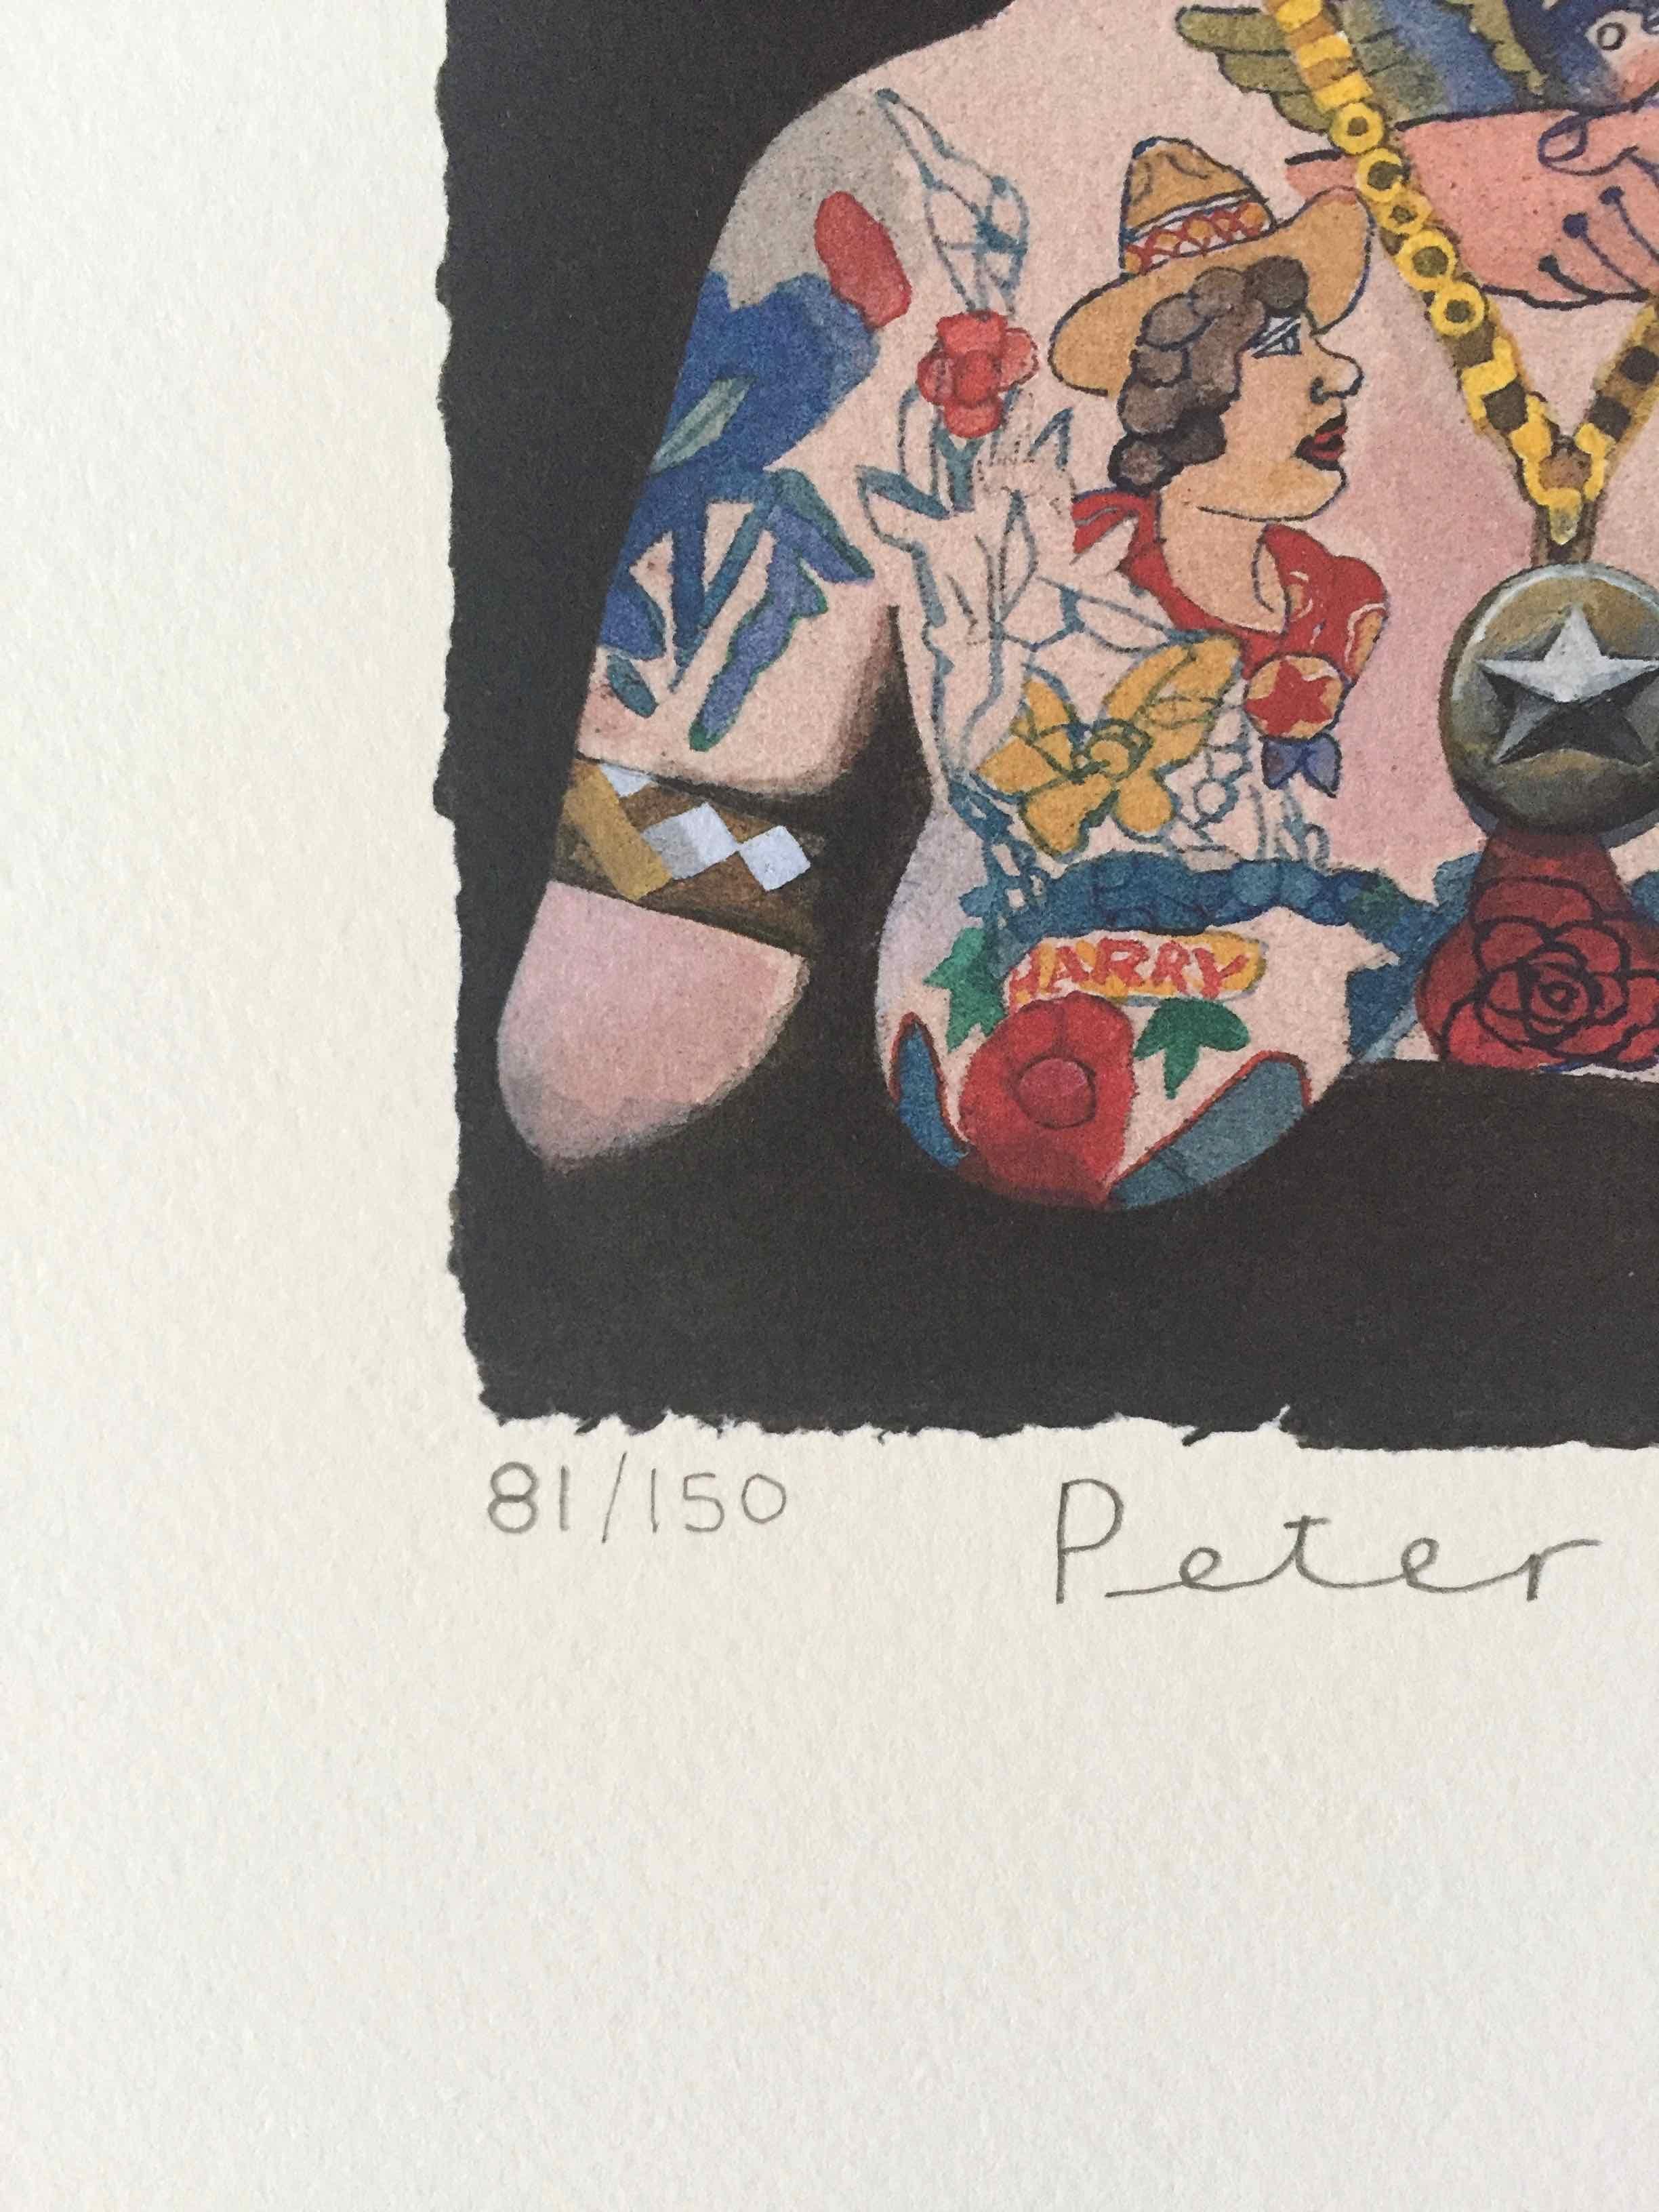 Tattooed People, Doris, 2015, Archival limited edition inkjet print on photo rag satin paper, Edition 81/150, 11 × 8 3/10 in, 28 × 21 cm, signed and numbered by Sir Peter Blake (unframed)

Widely regarded as the godfather of British Pop art and the